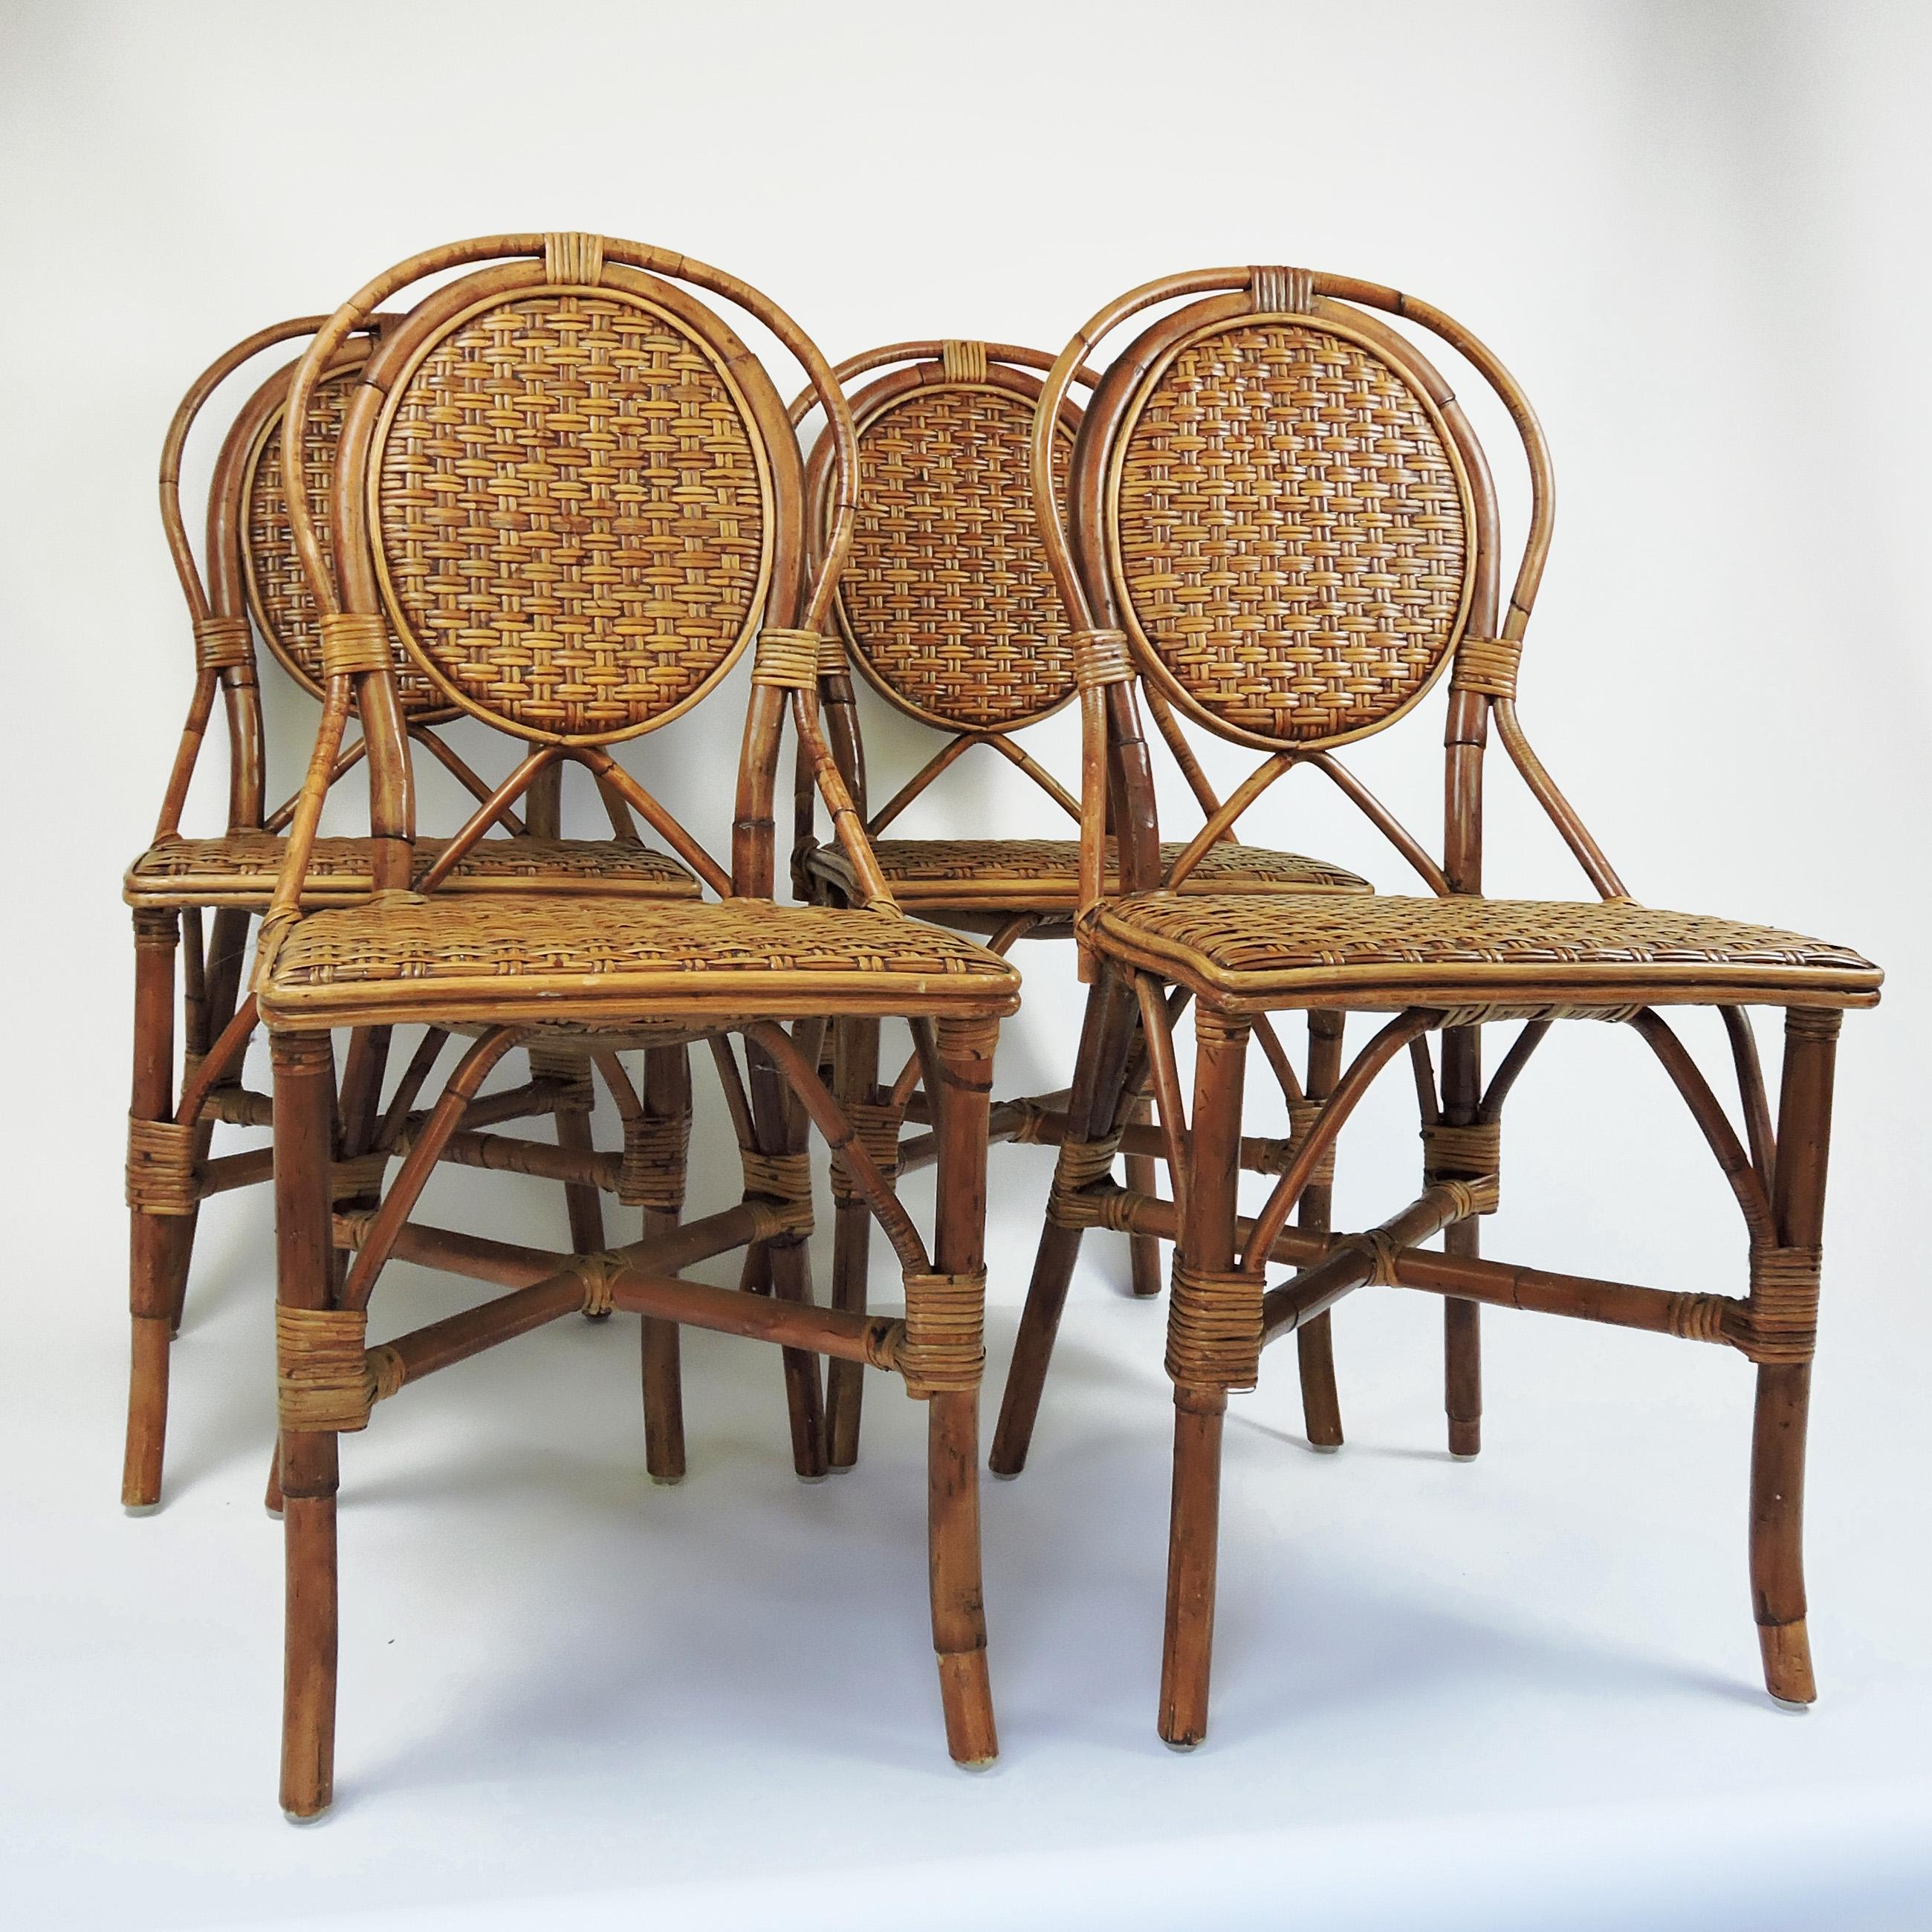 Late 20th Century French Style Parisian Cafe Rattan Dining Chairs, Set of 4 For Sale